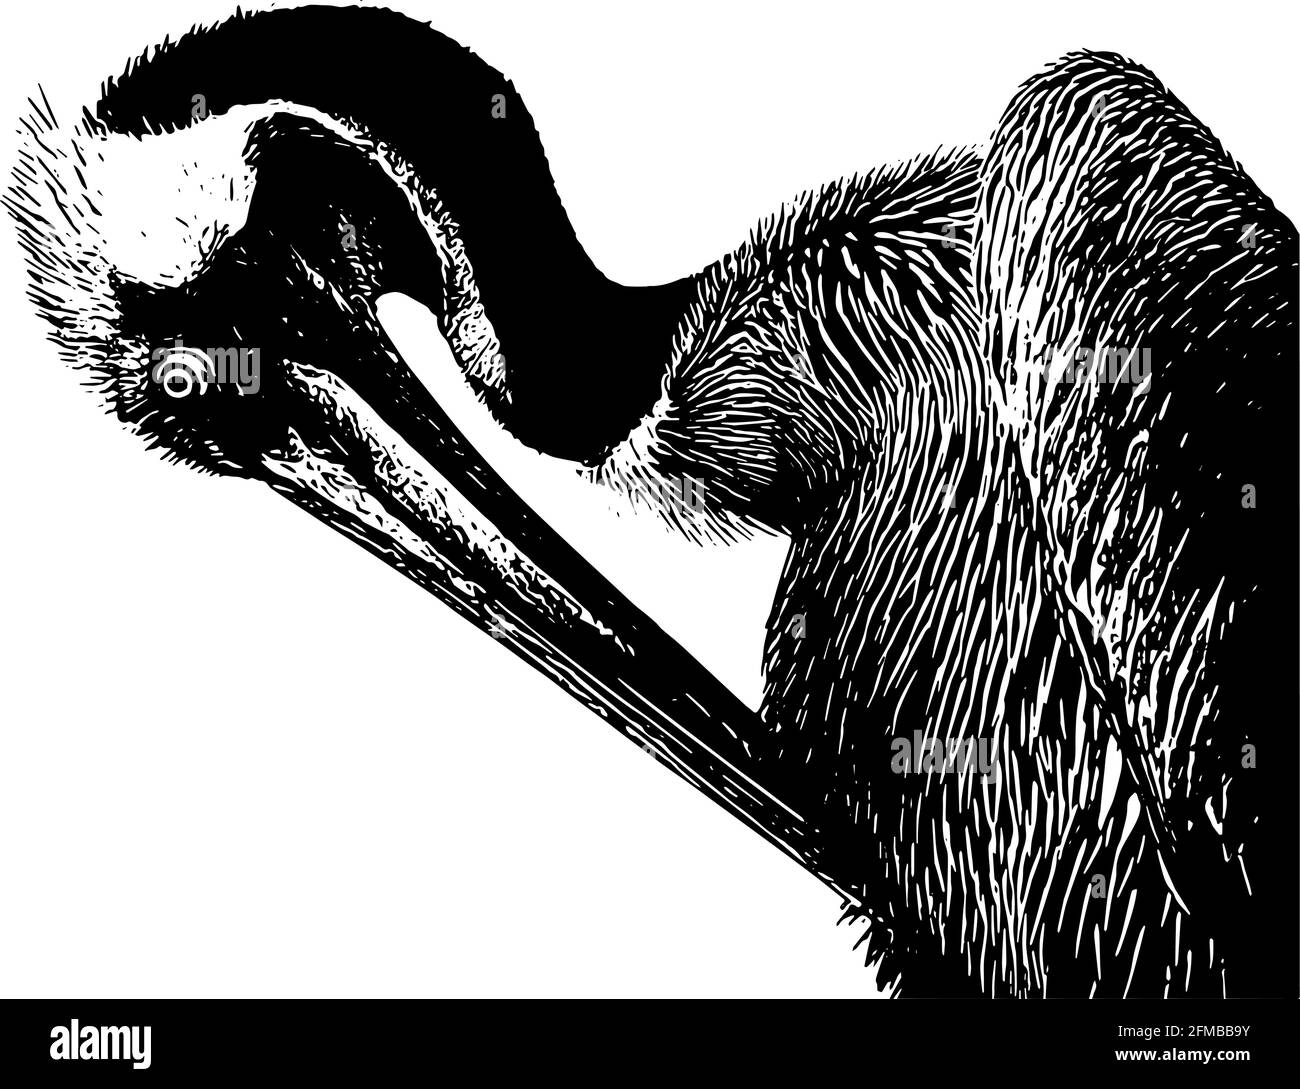 Pelican Profile Sketch in black on white background Stock Vector